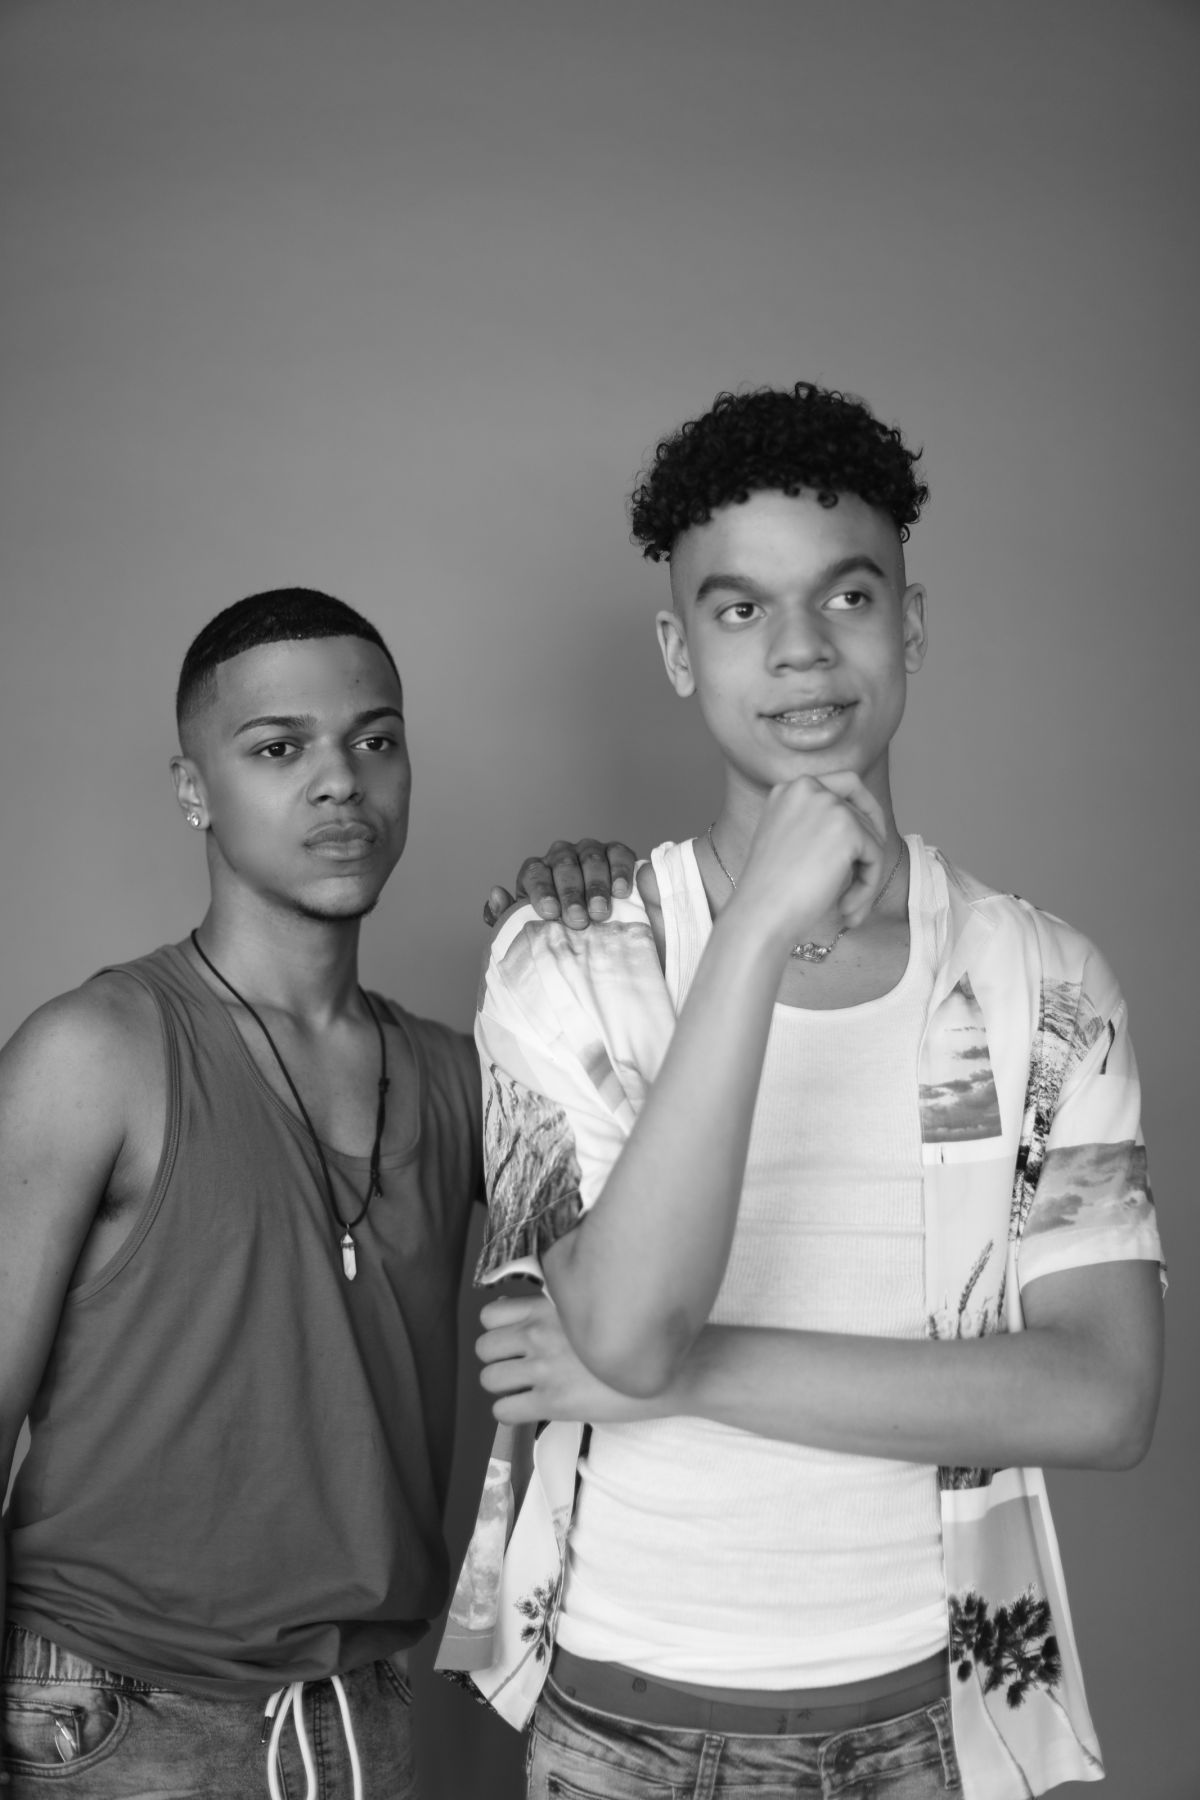 Wesley De Jesus Bruno, Los Dos Hermanos The Two Brothers, Black and White Photograph, 10 x 15